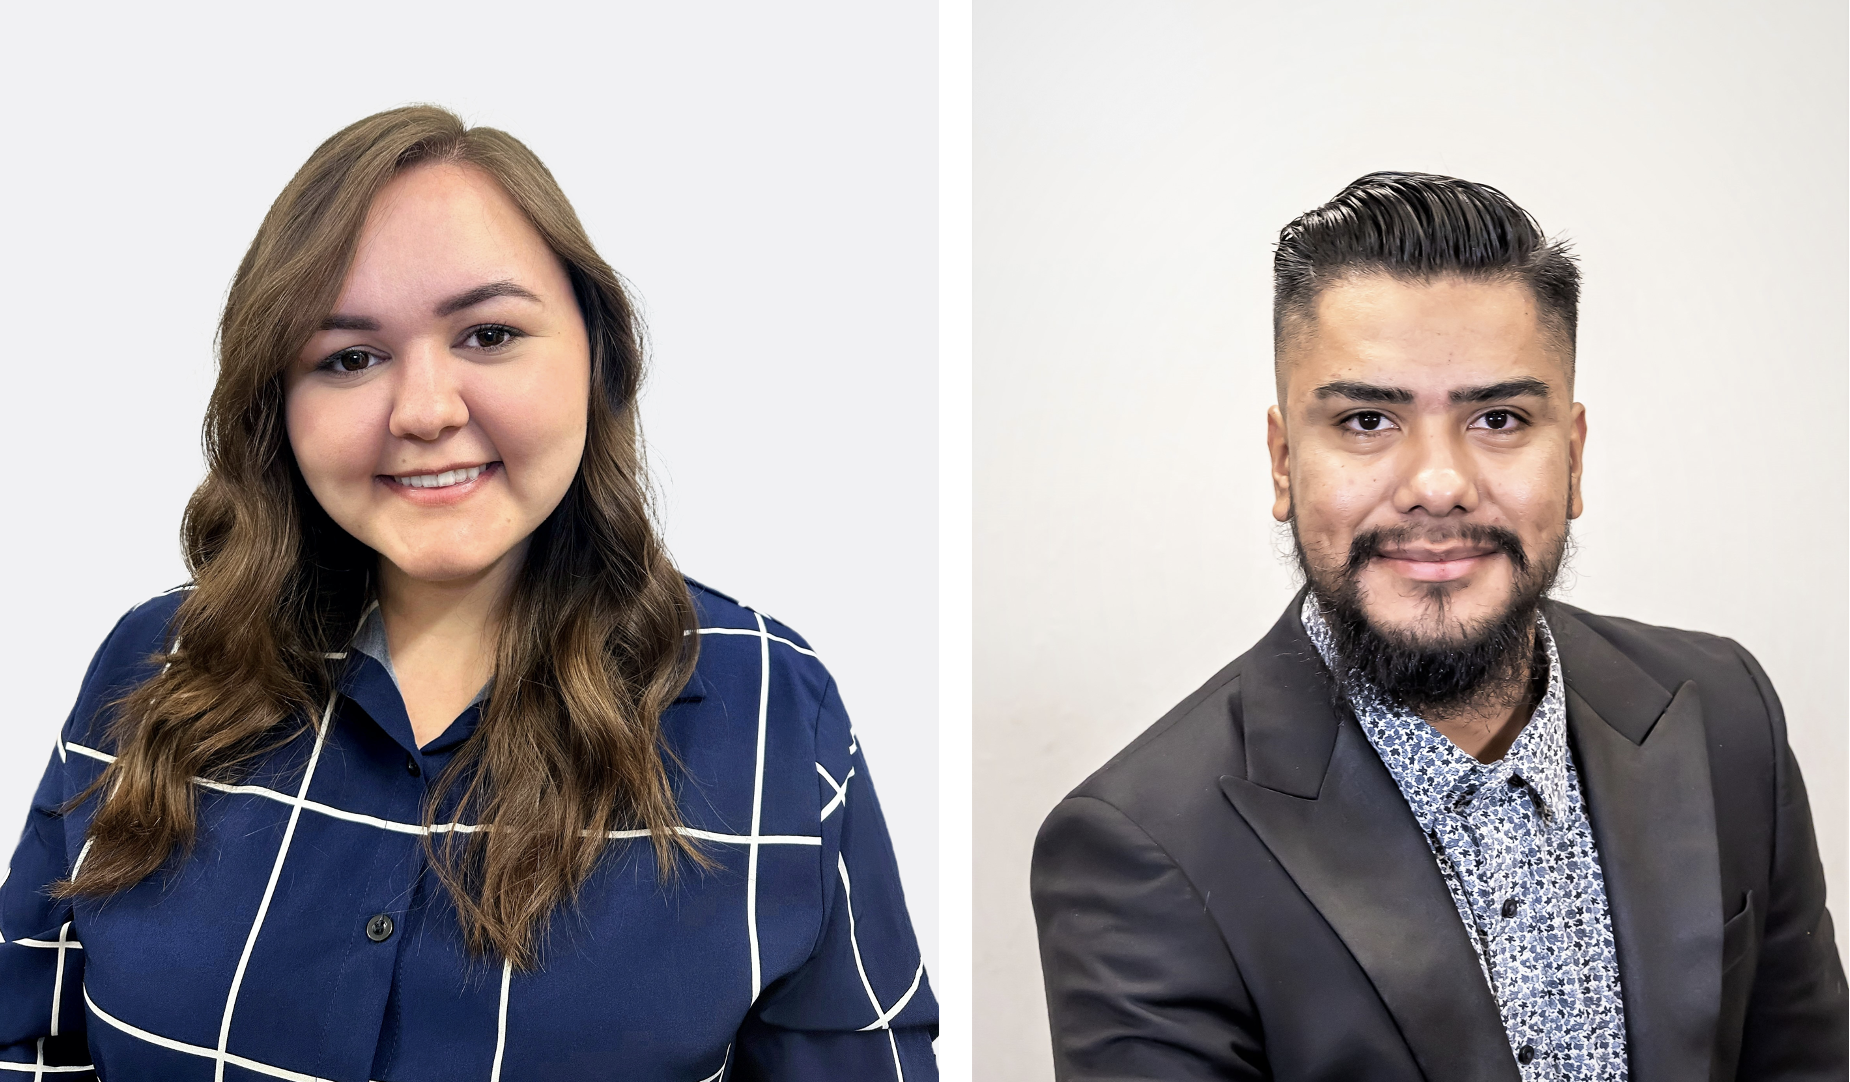 Welcome to Anna Babchanik and Oscar Sosa Cordova, our Summer 2023 SURE Researchers